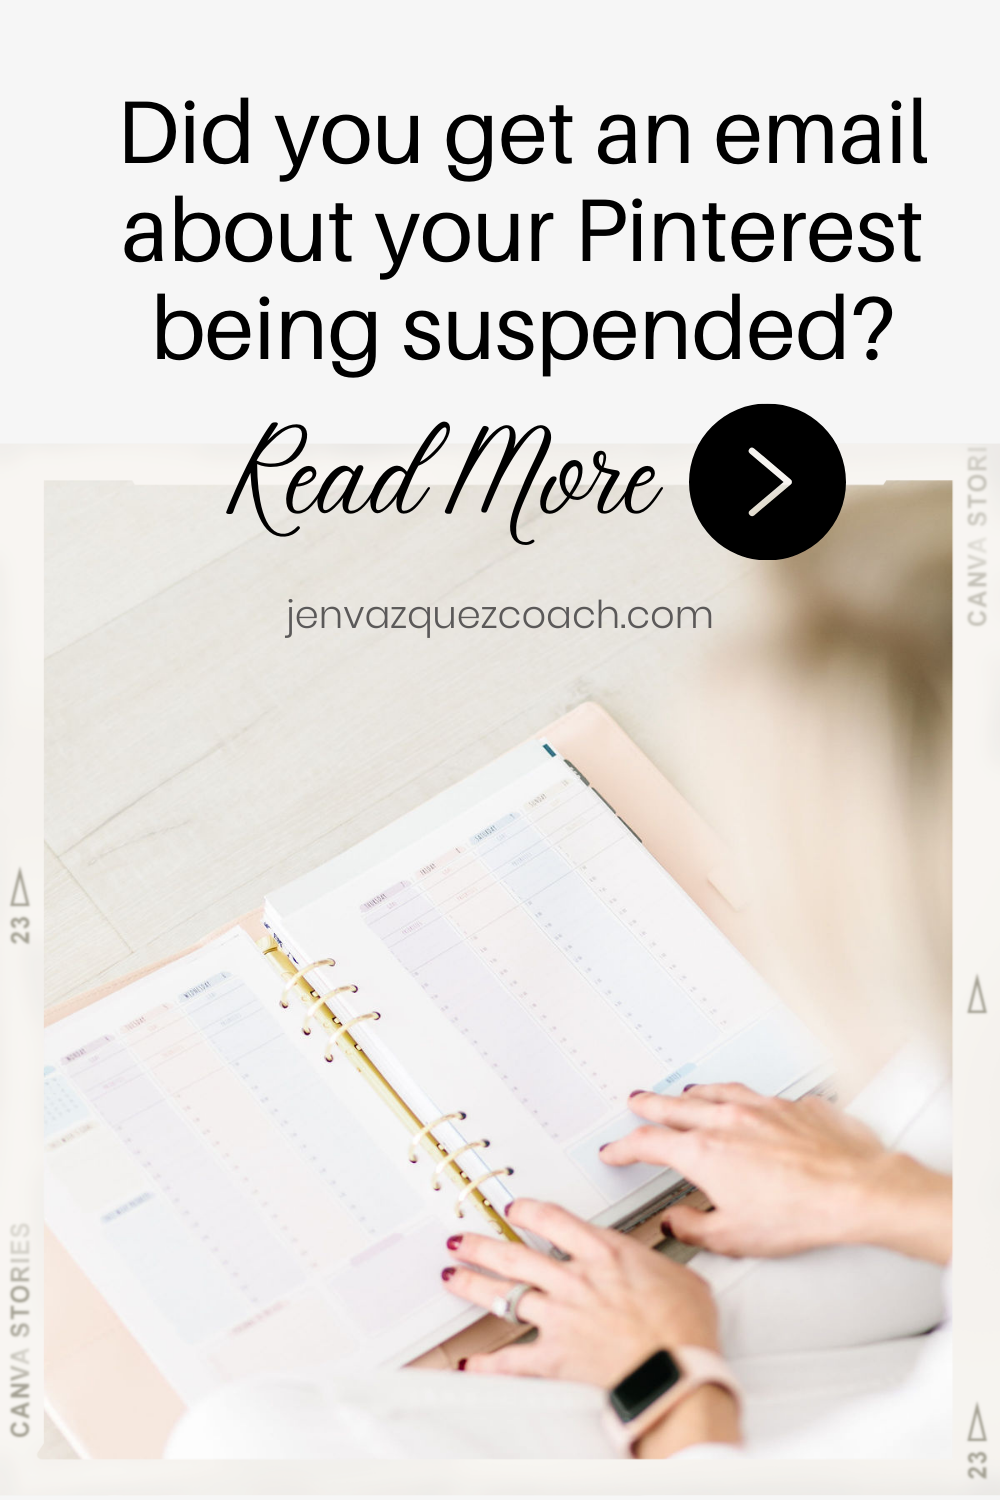 Did you get an email about your Pinterest being suspended? LET ME HELP